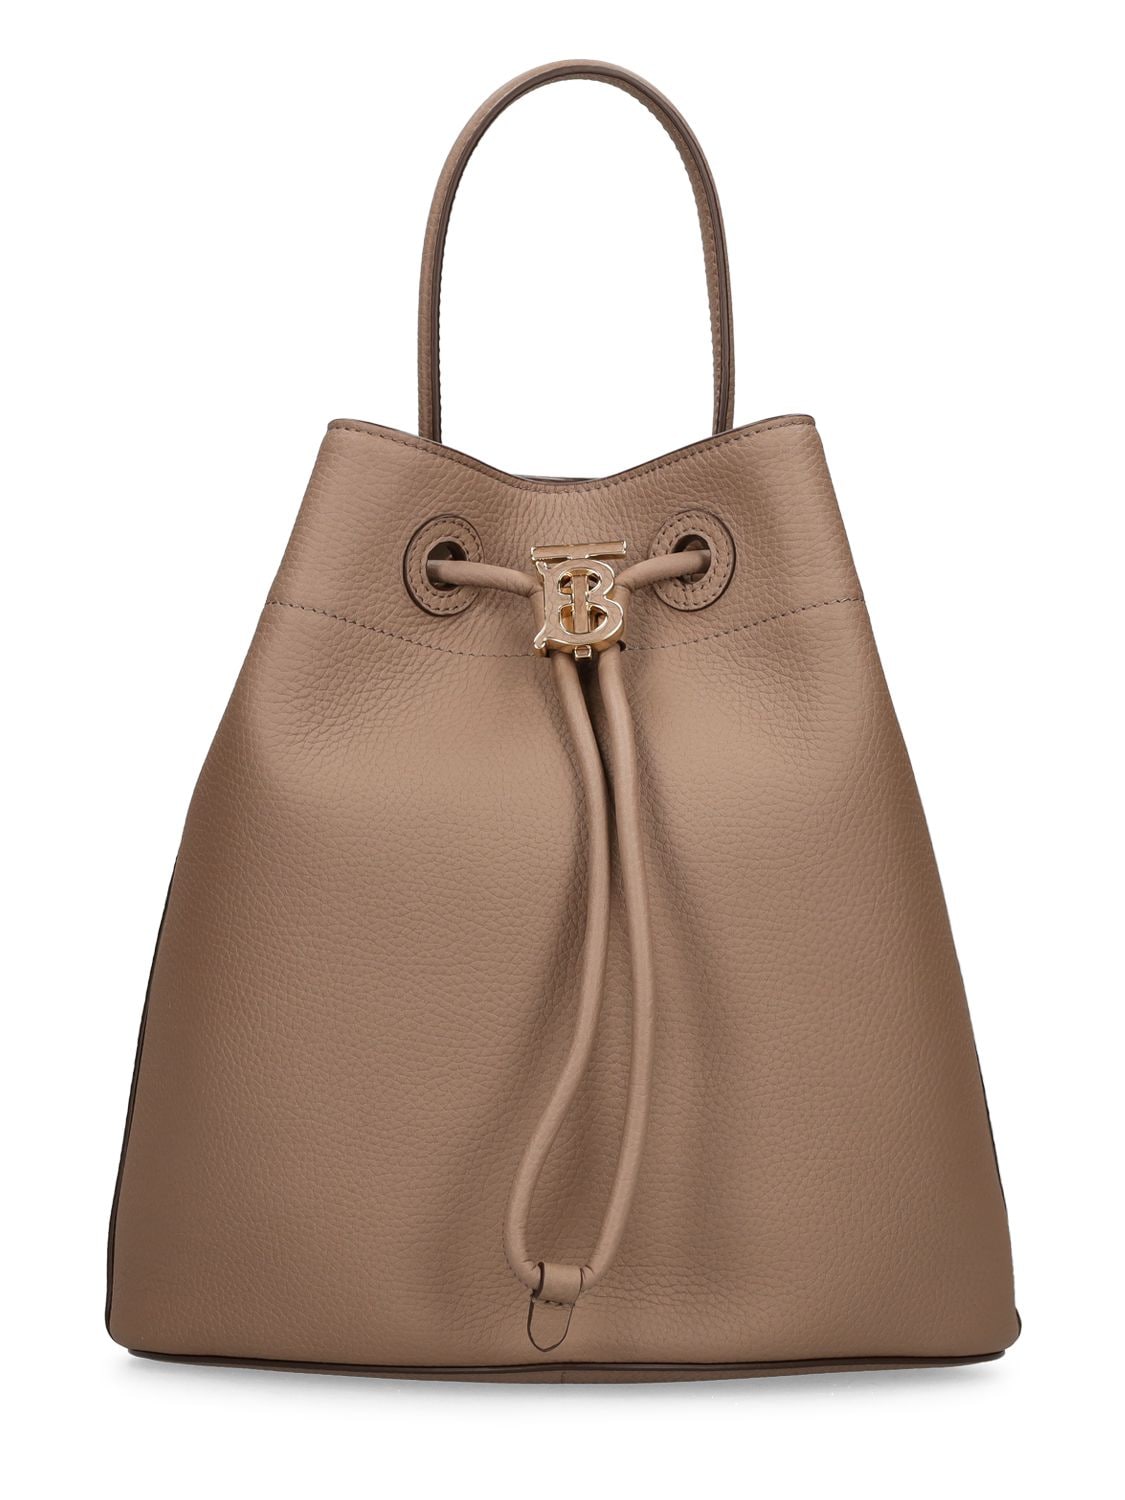 Burberry Small Drawstring Leather Bucket Bag In Light Saddle